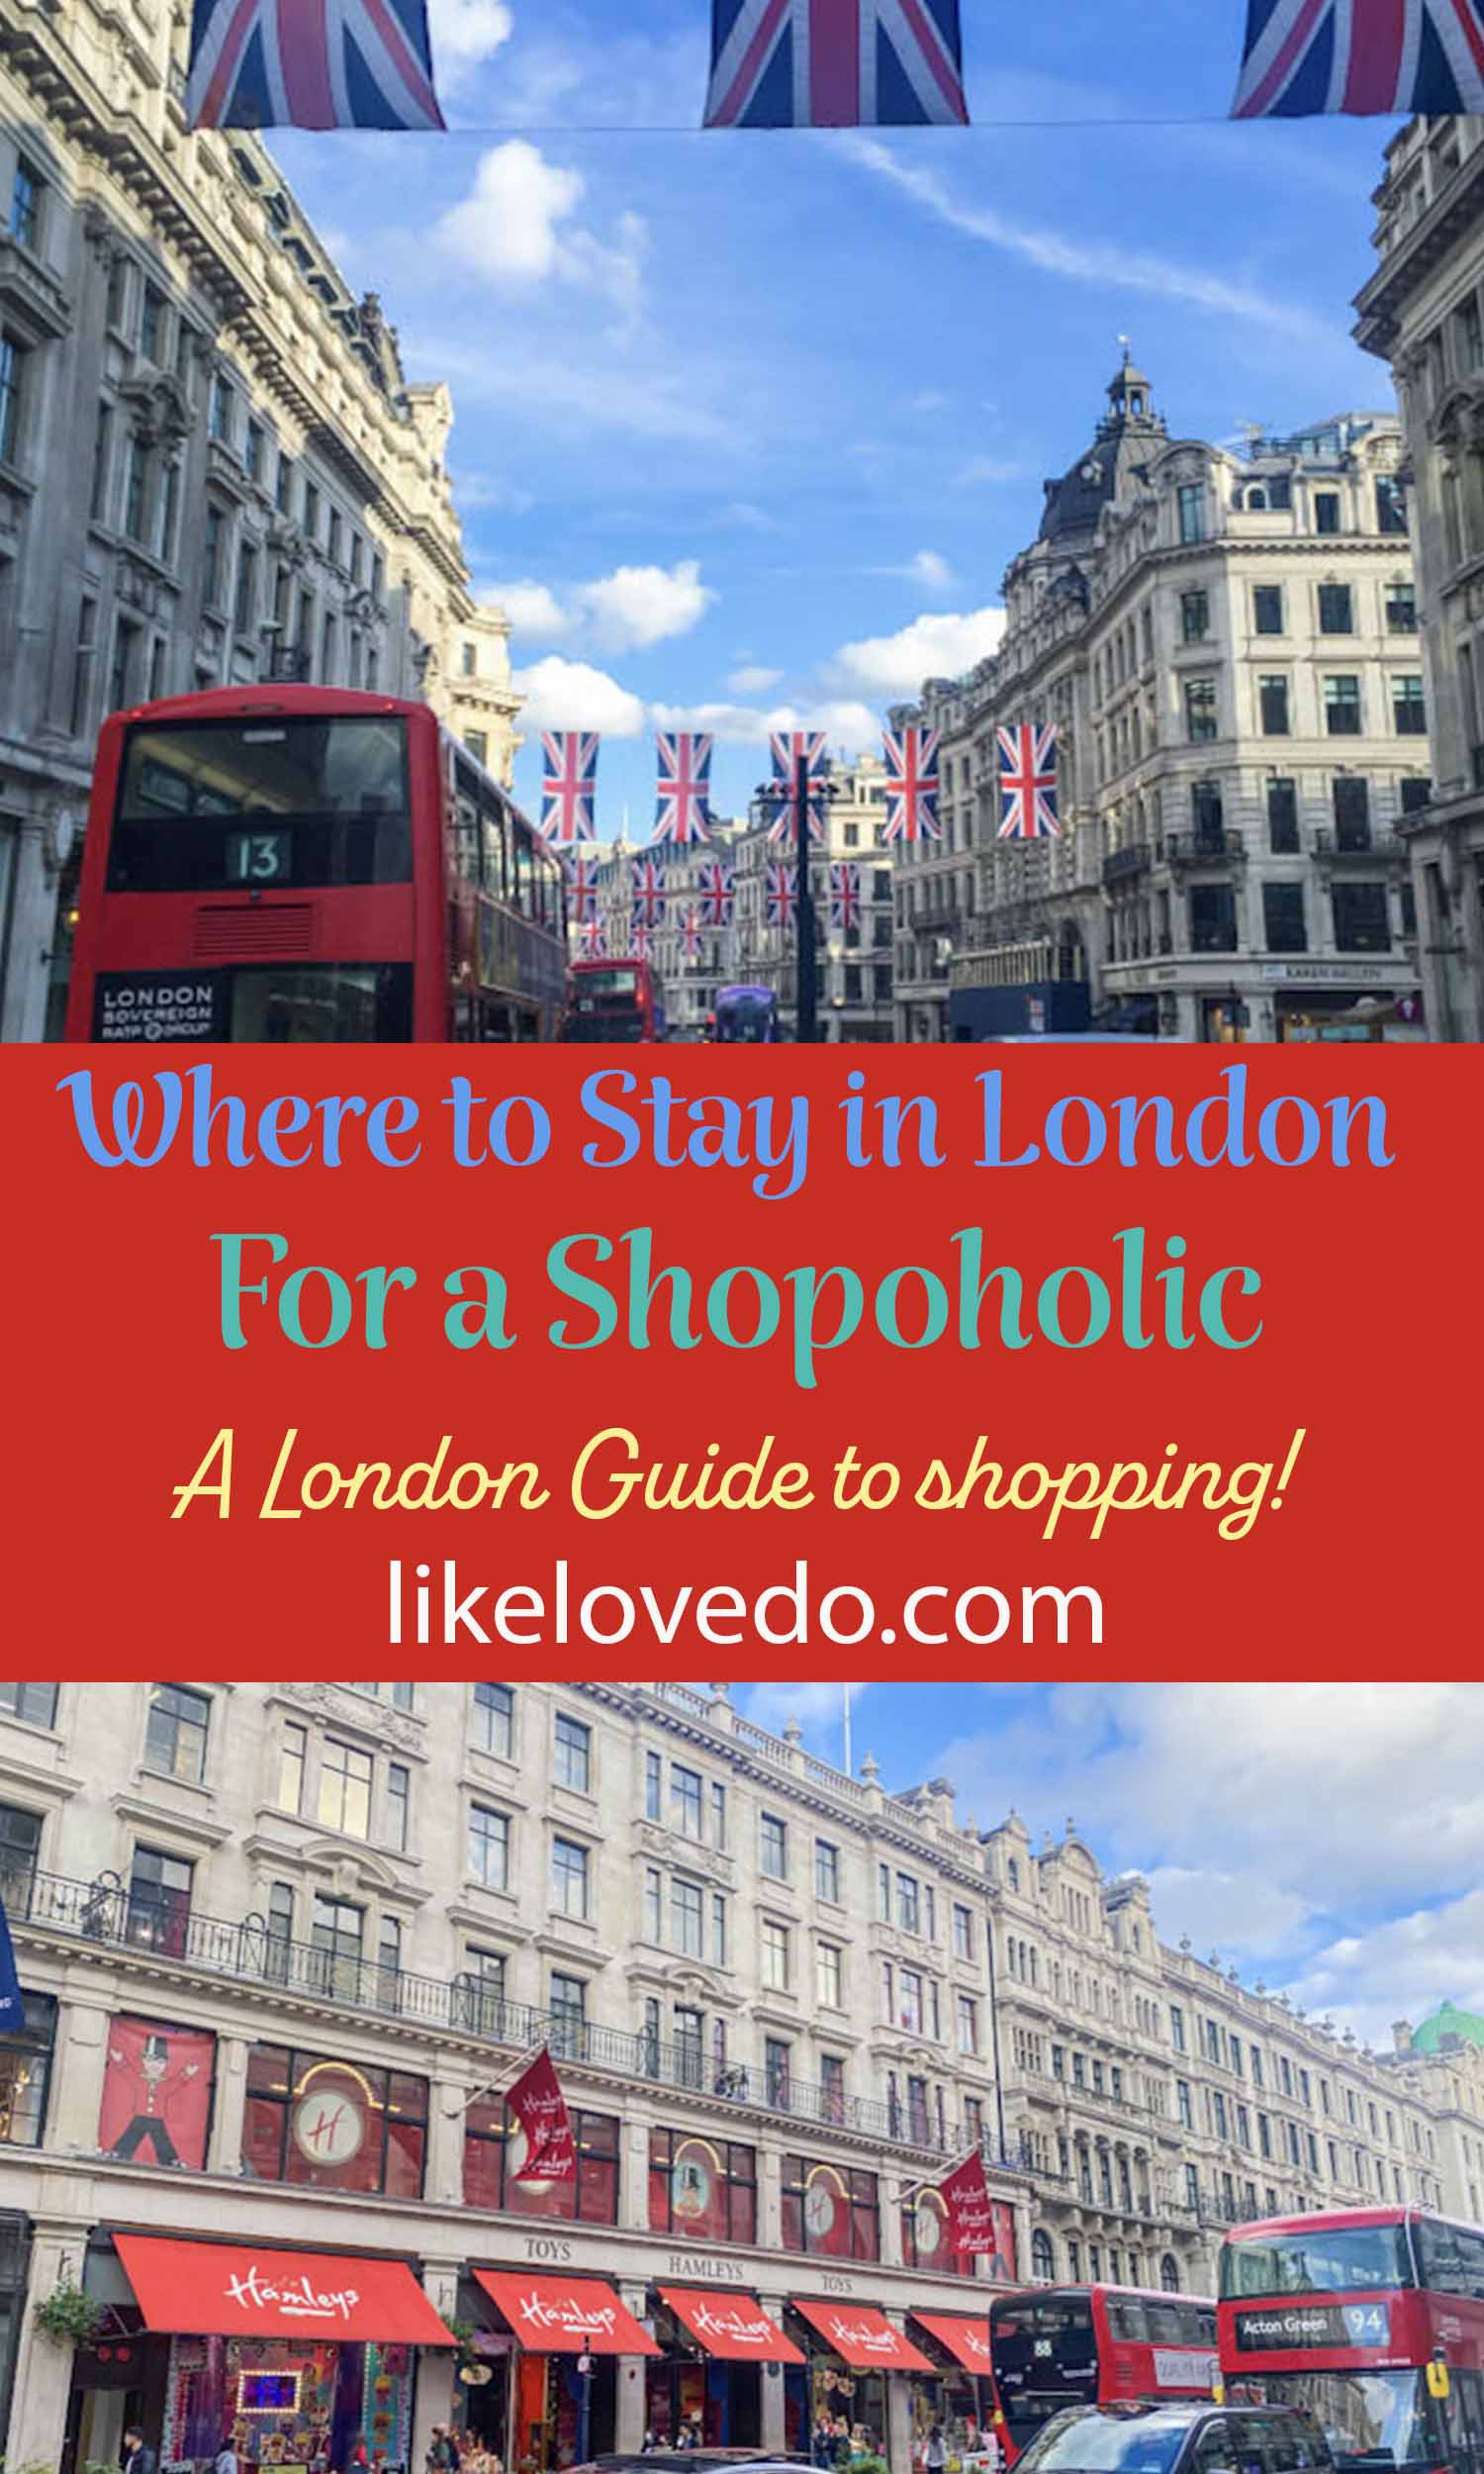 Where to Stay in London for a Shopaholic